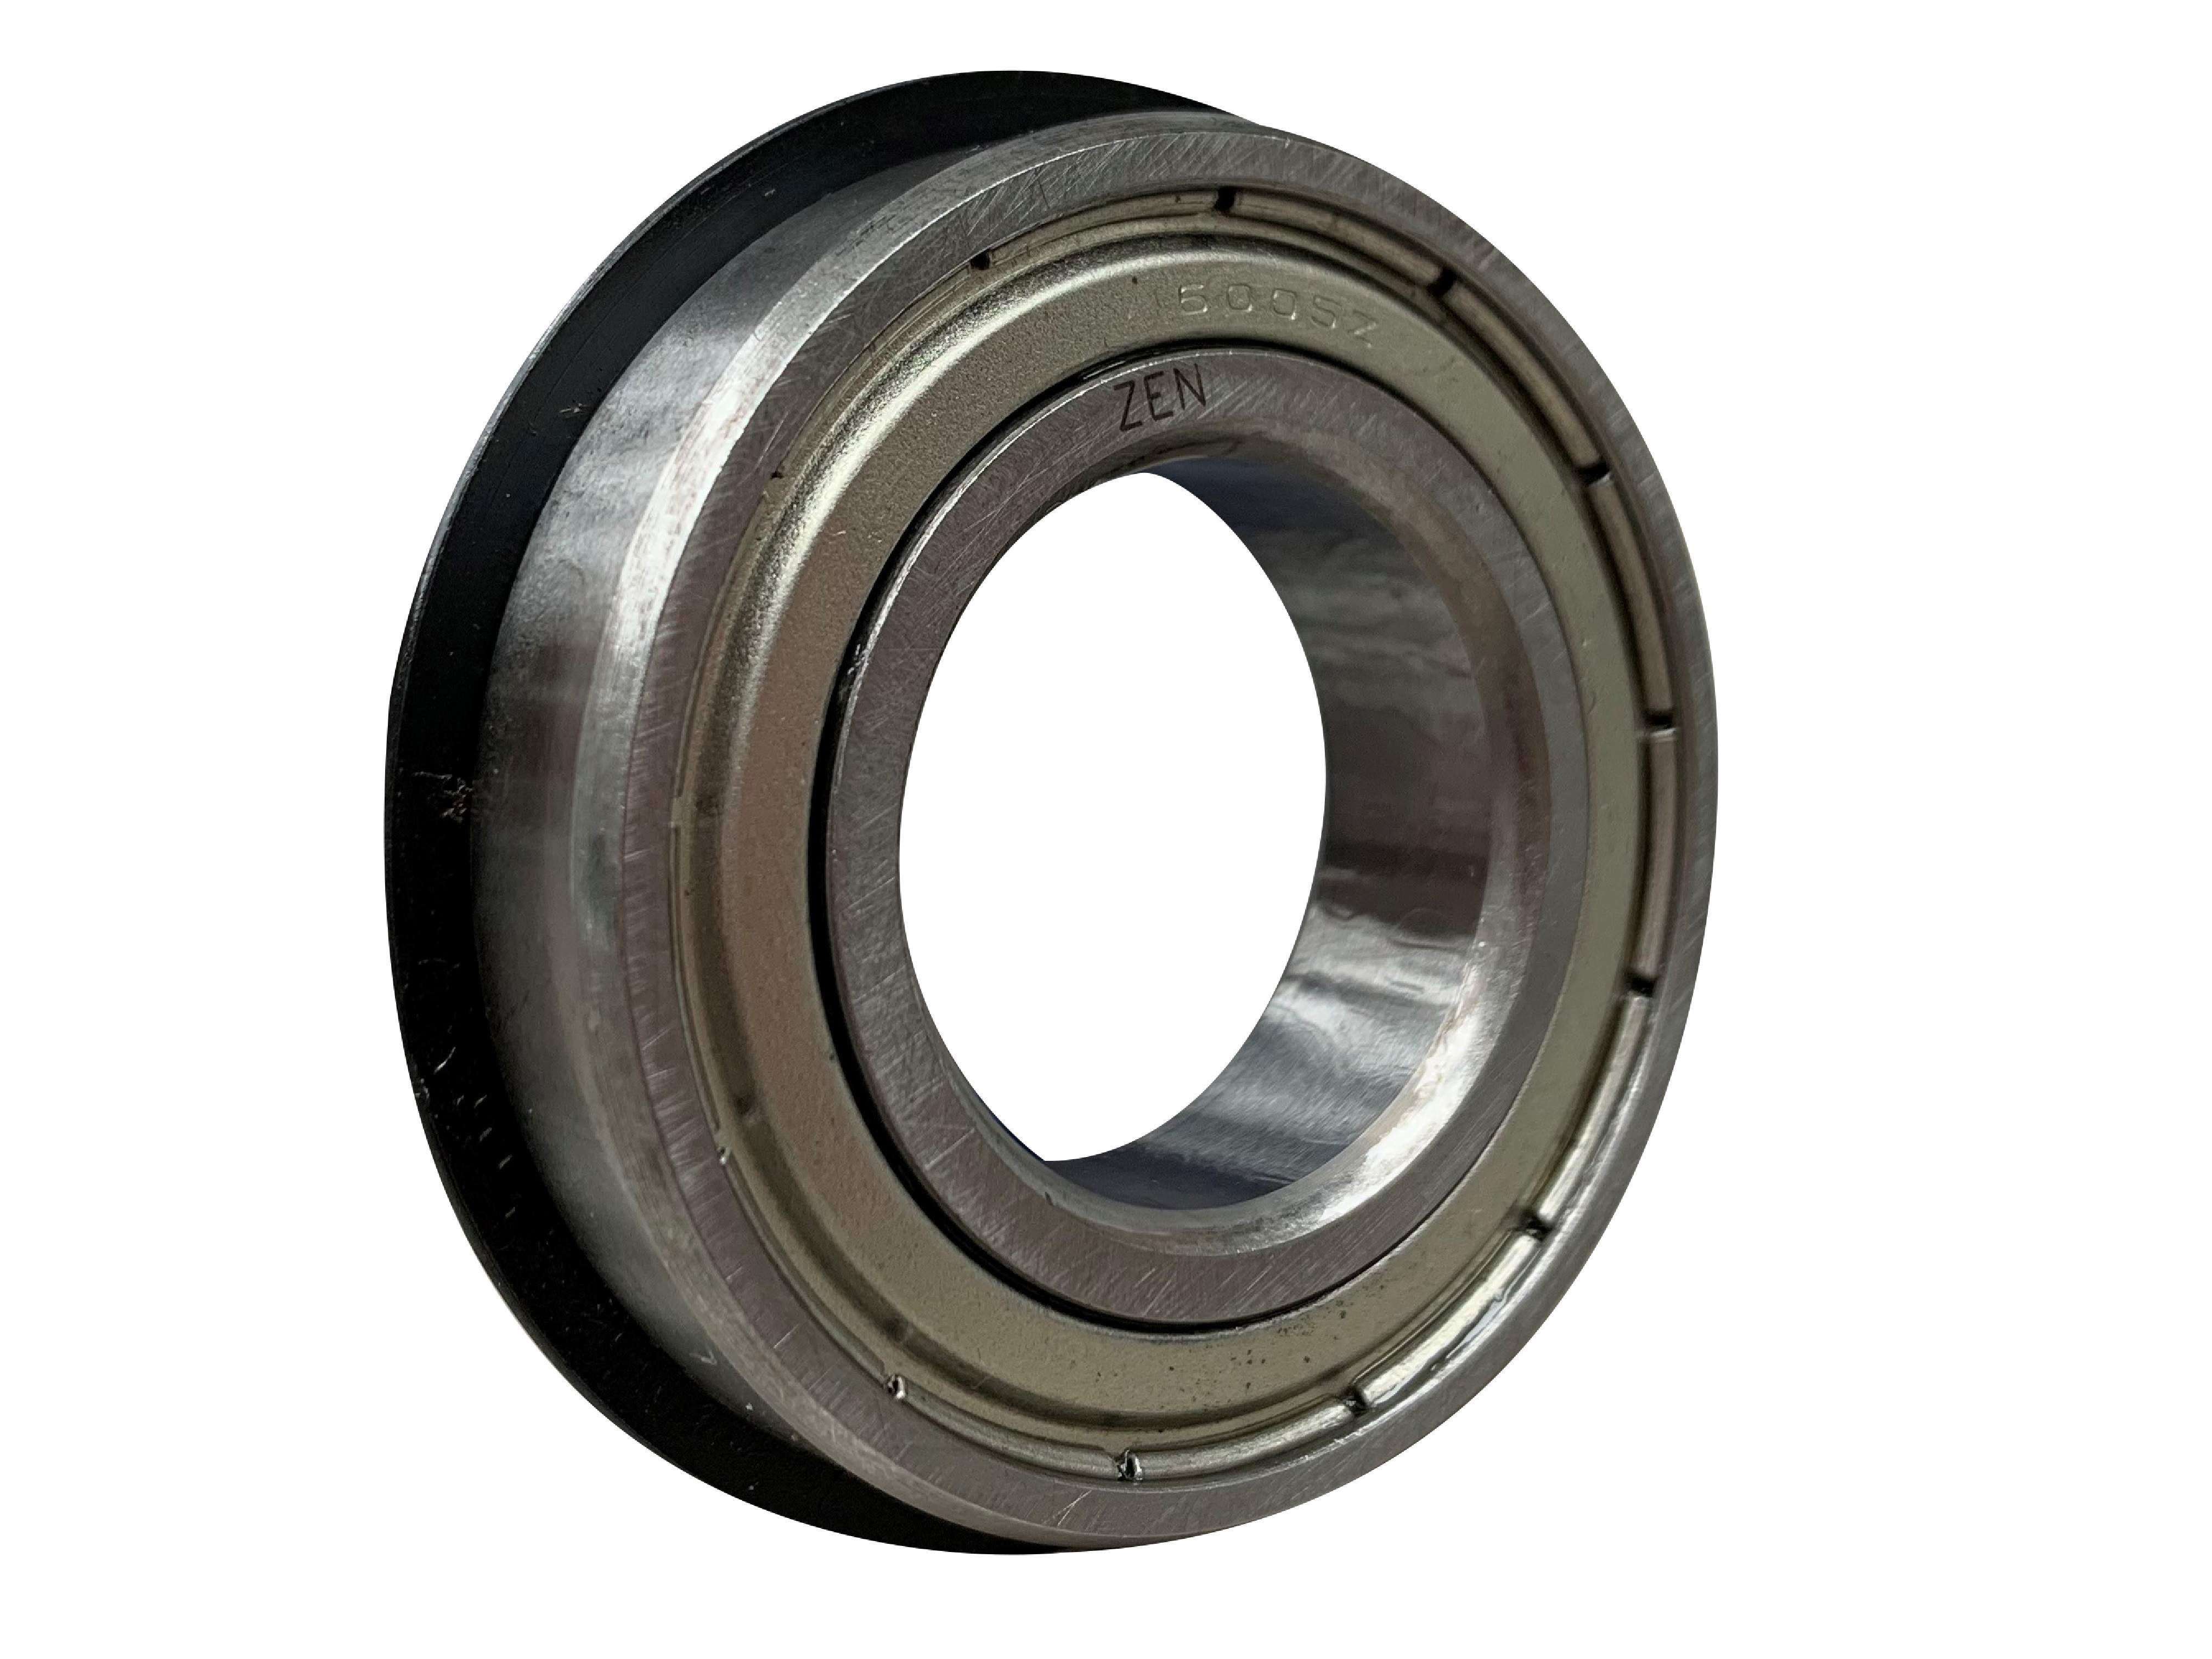 ZEN 6300-2Z-NR Shielded Ball Bearing With Snap Ring 10mm x 35mm x 11mm